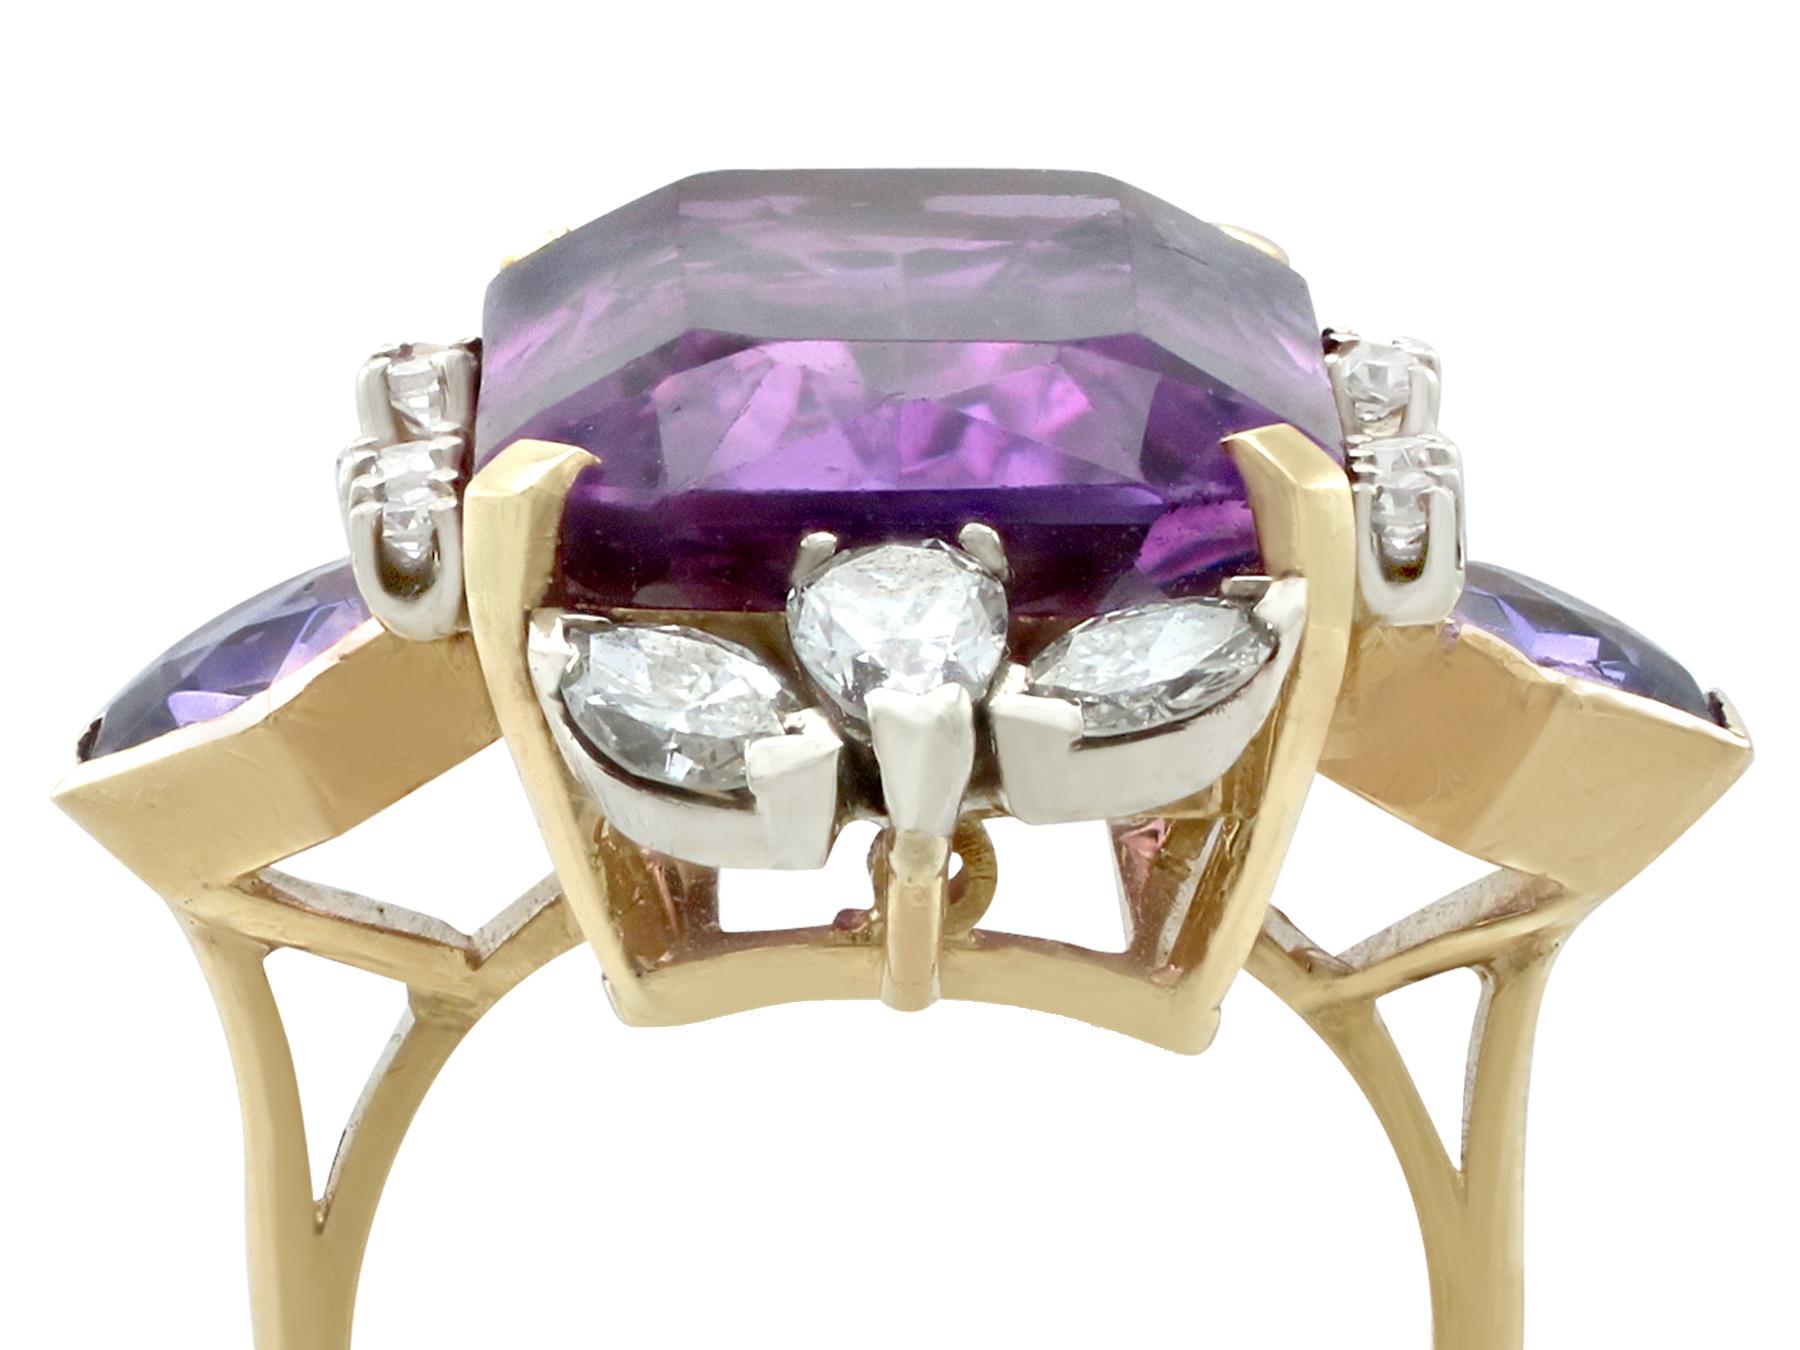 A stunning, fine and impressive vintage 21.82 carat natural amethyst and 1.59 carat diamond, 18 karat yellow gold dress ring; part of our vintage jewelry and estate jewelry collections.

This large and impressive vintage amethyst and diamond dress